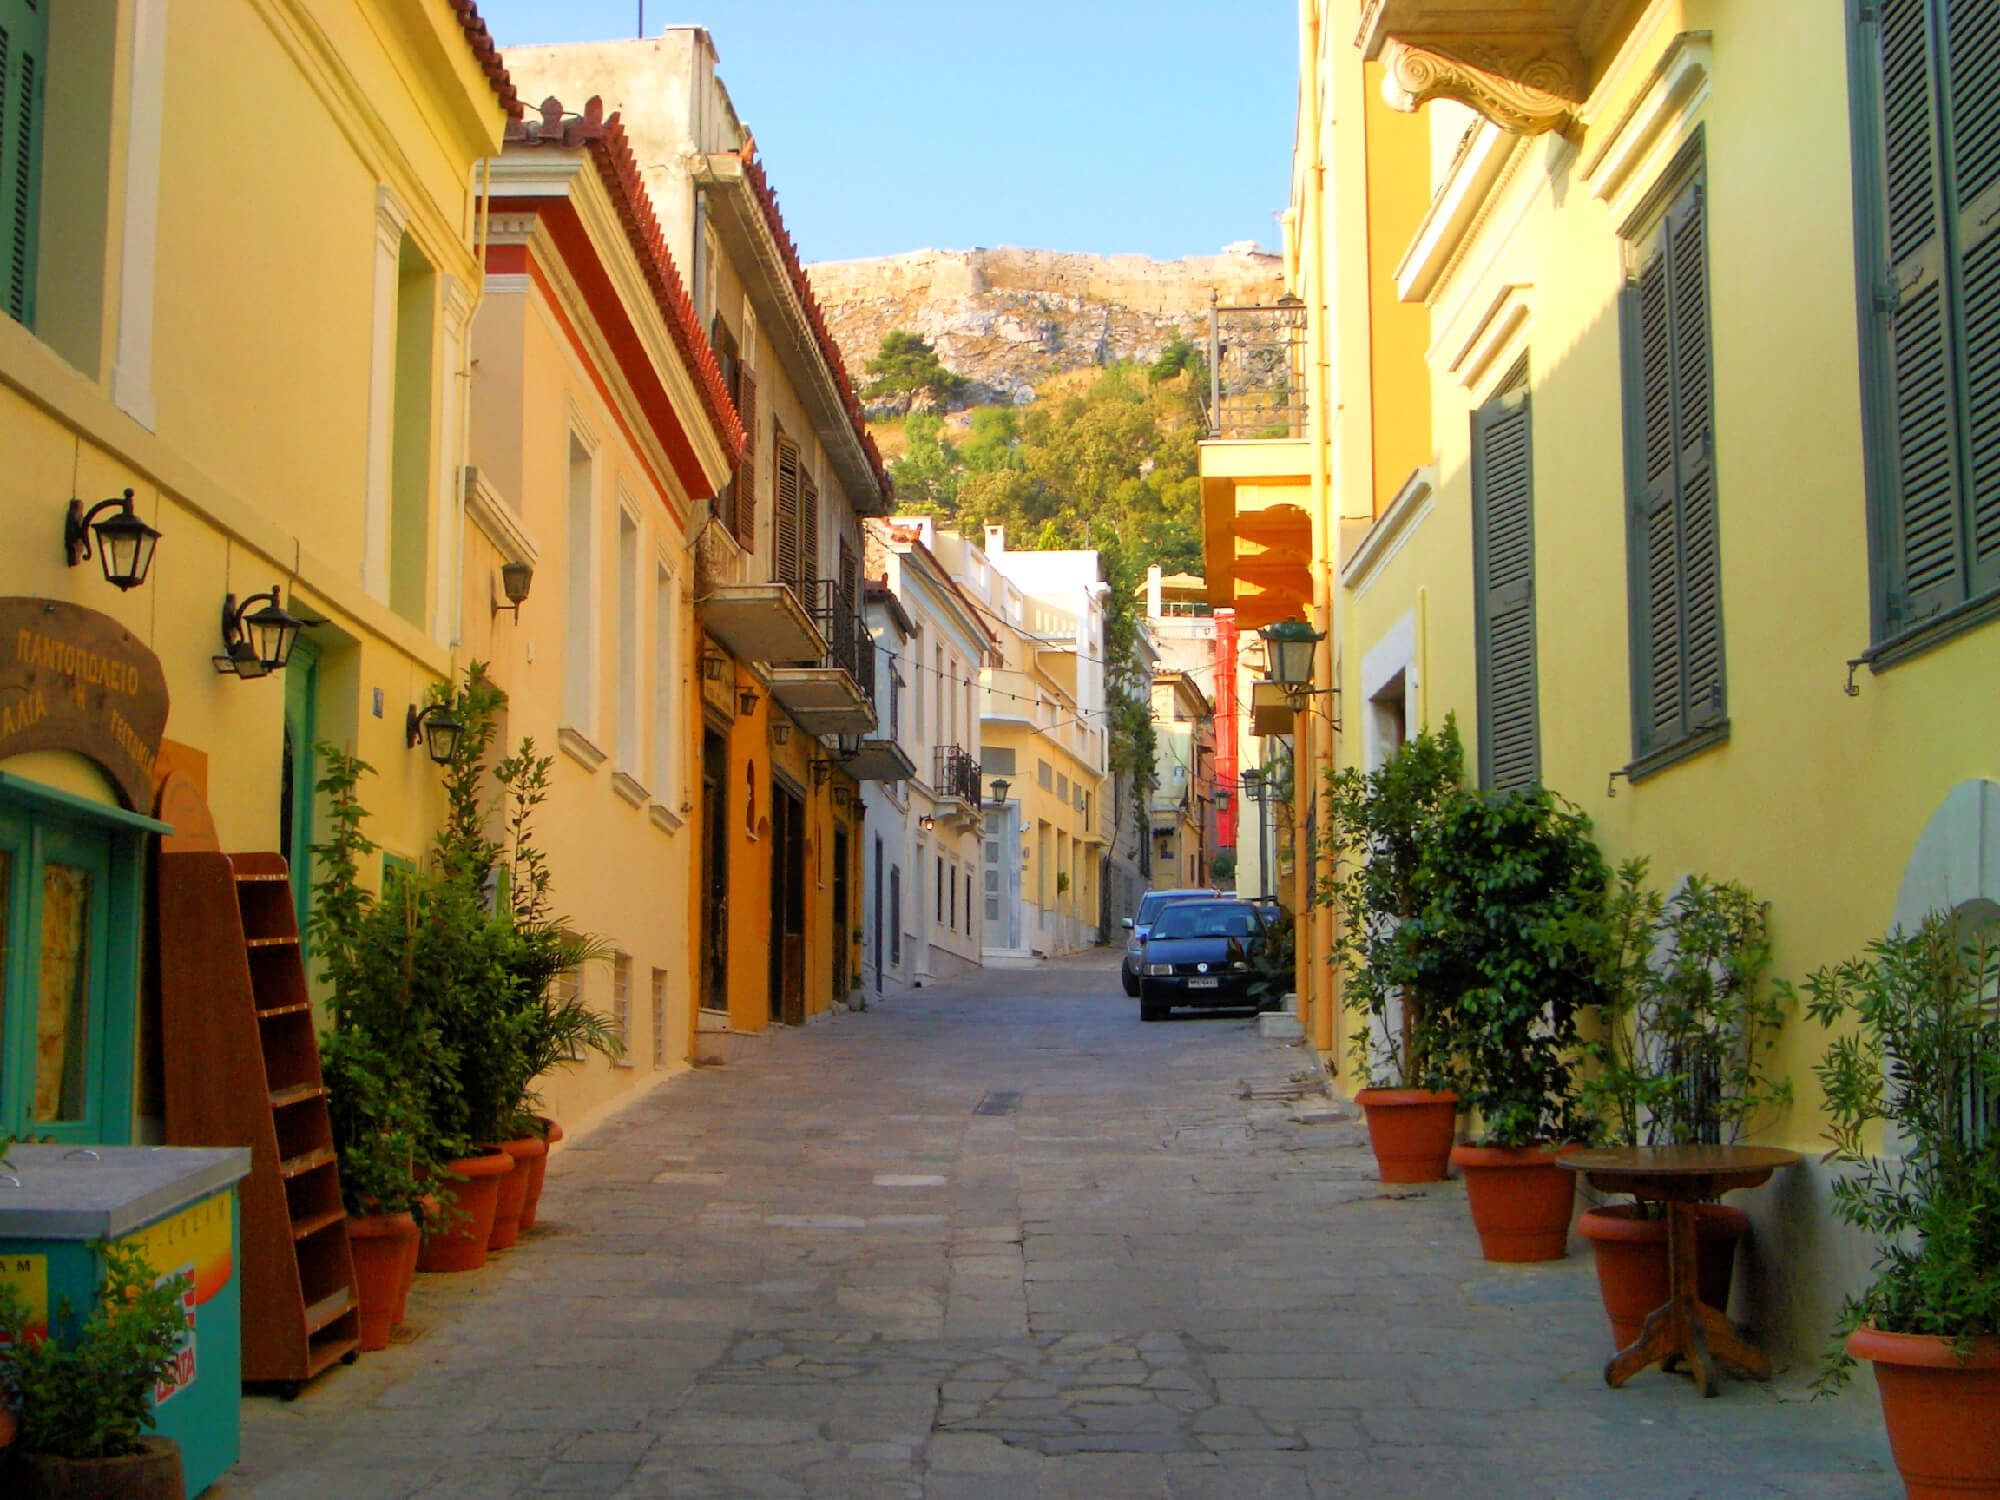 The Plaka District in Athens.